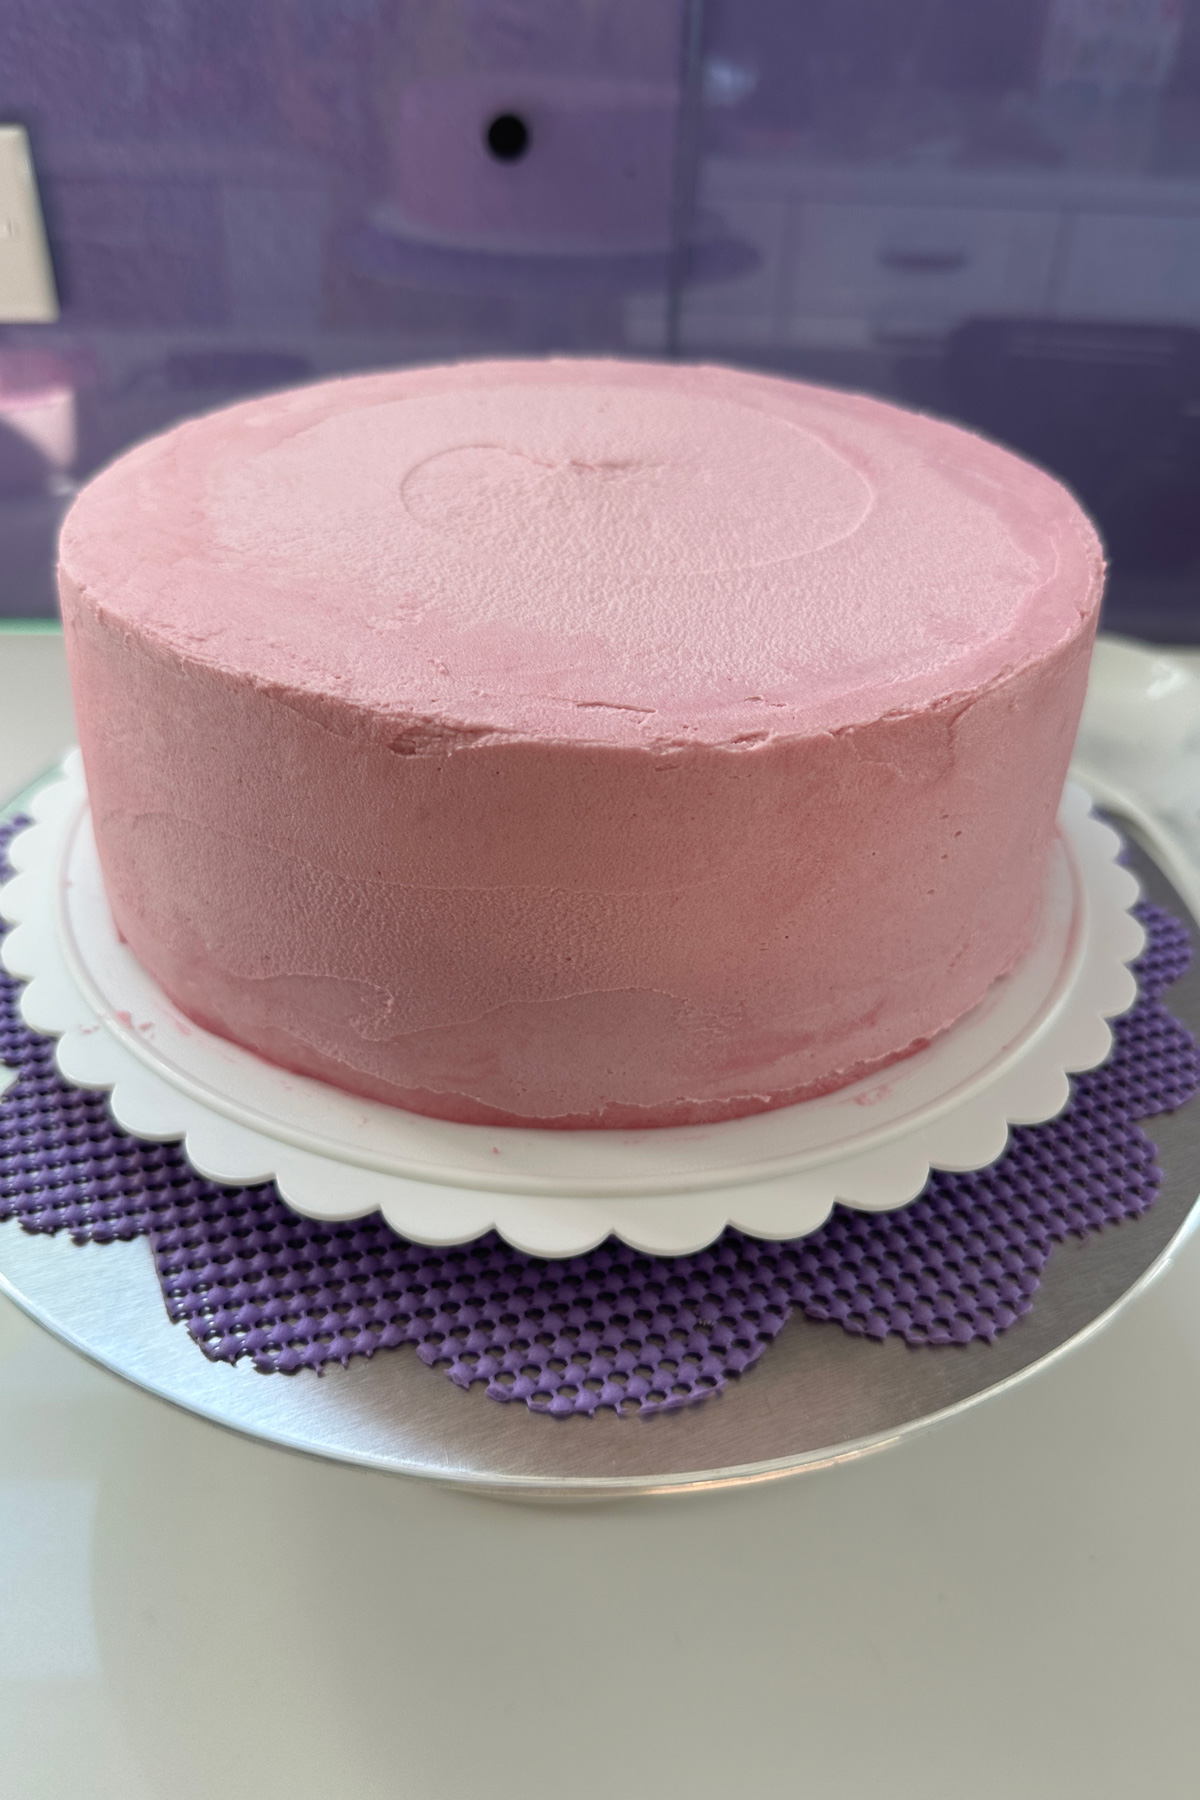 the nutella cake covered with pink frosting